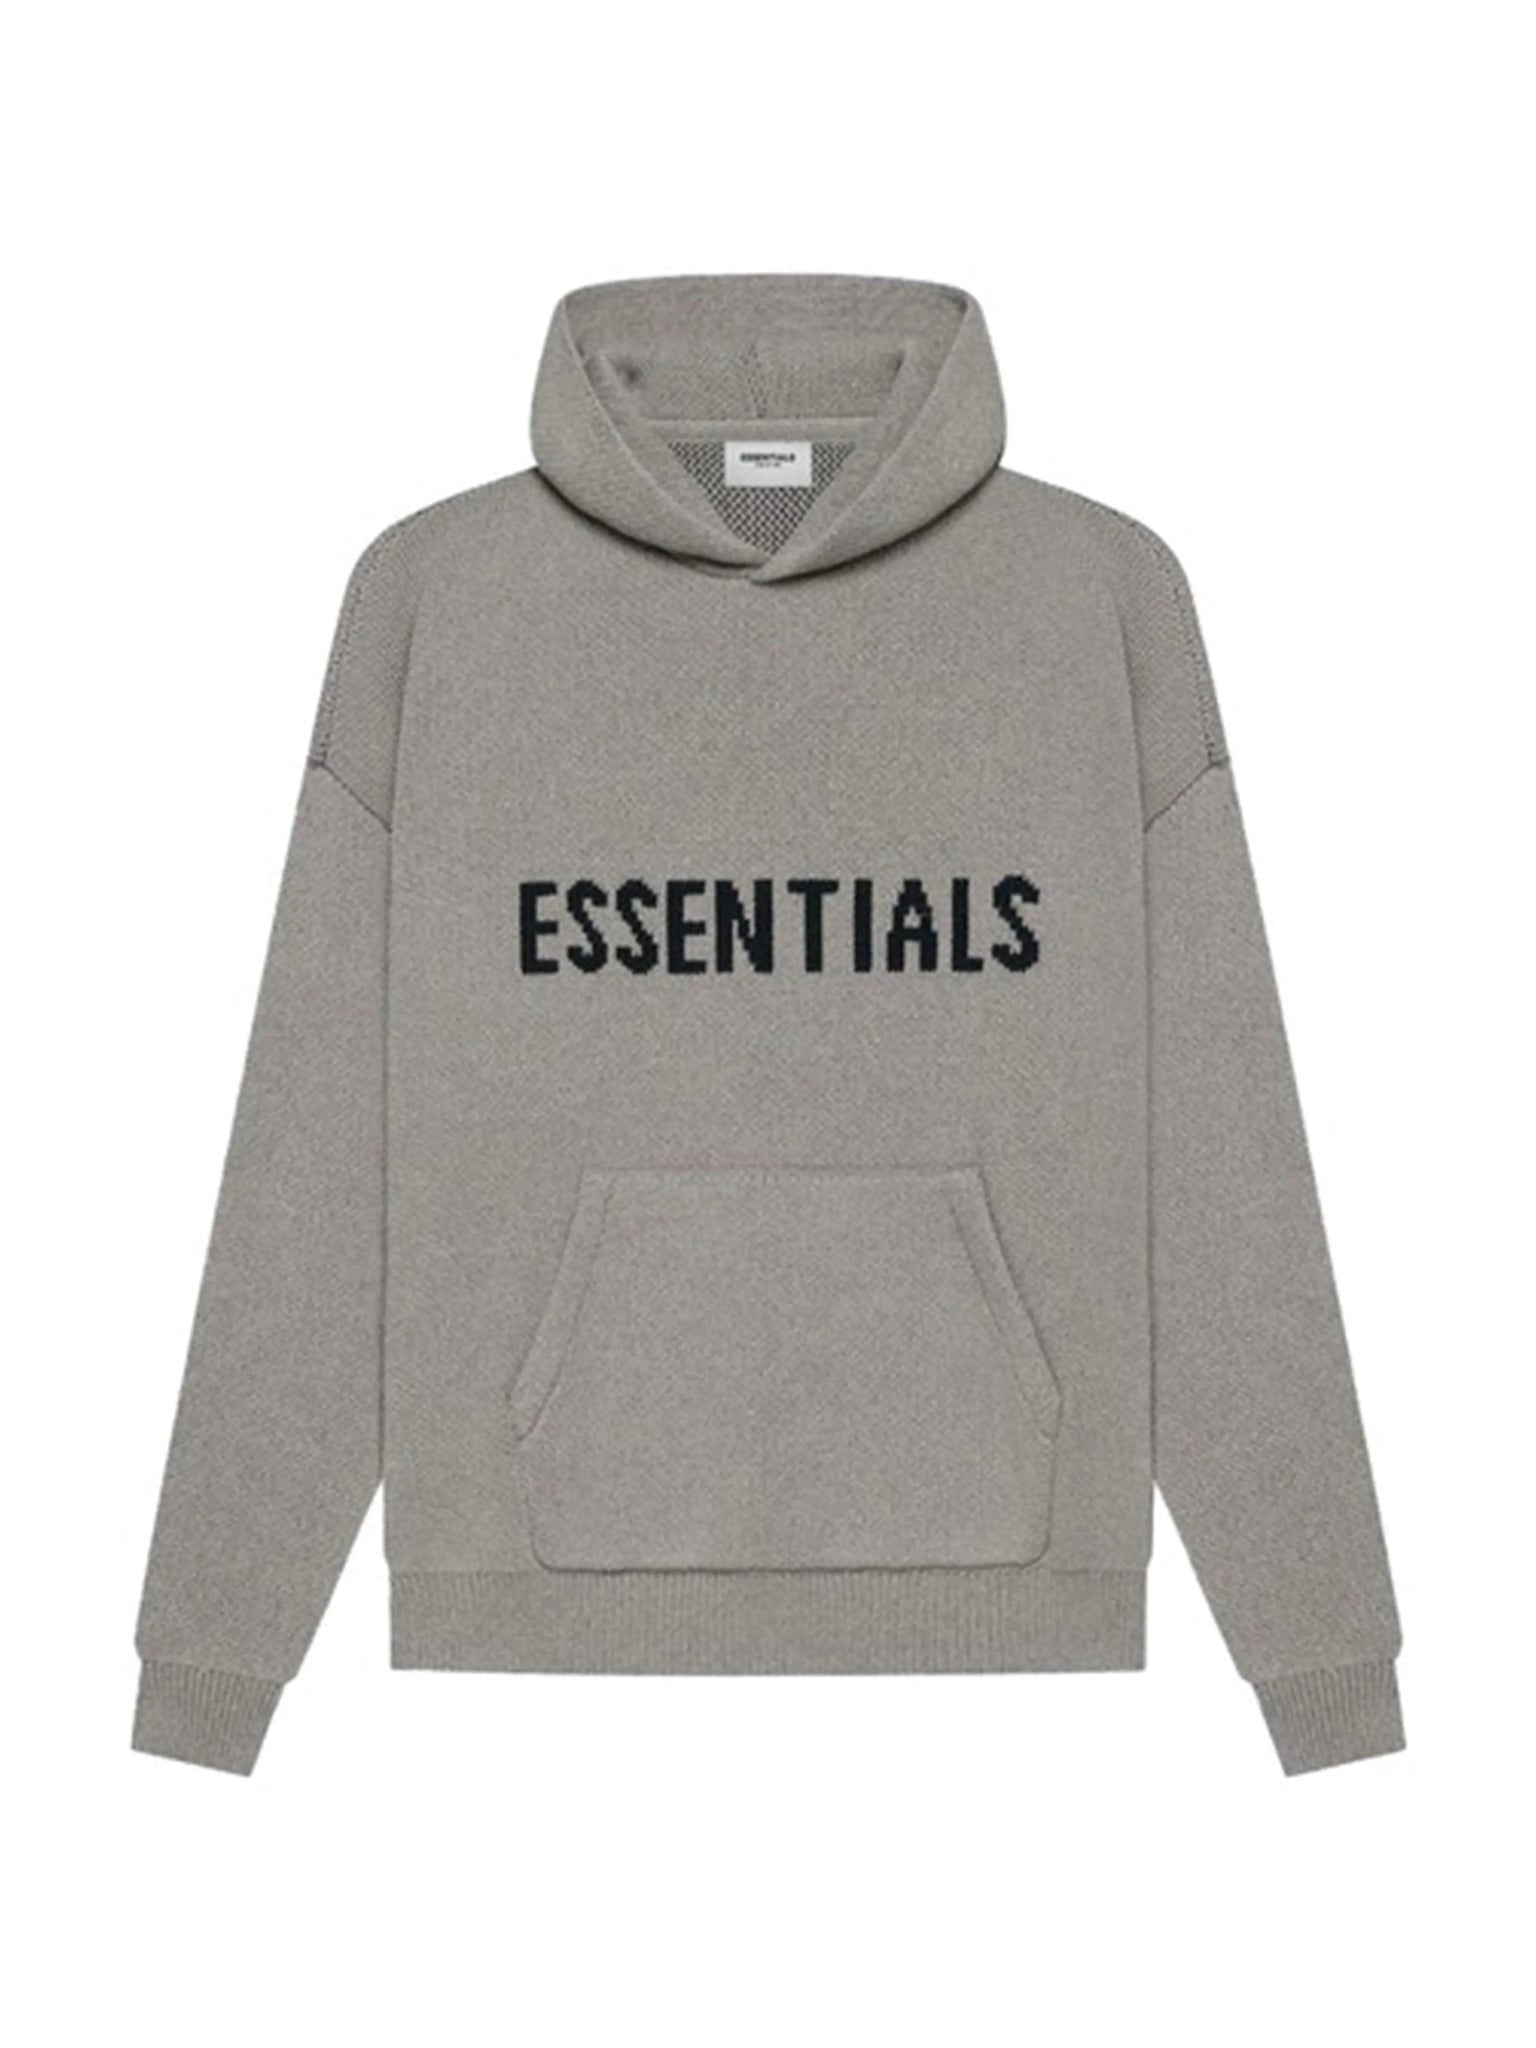 Fear Of God Essentials Knit Pullover Hoodie Dark Heather Oatmeal [SS21] Prior